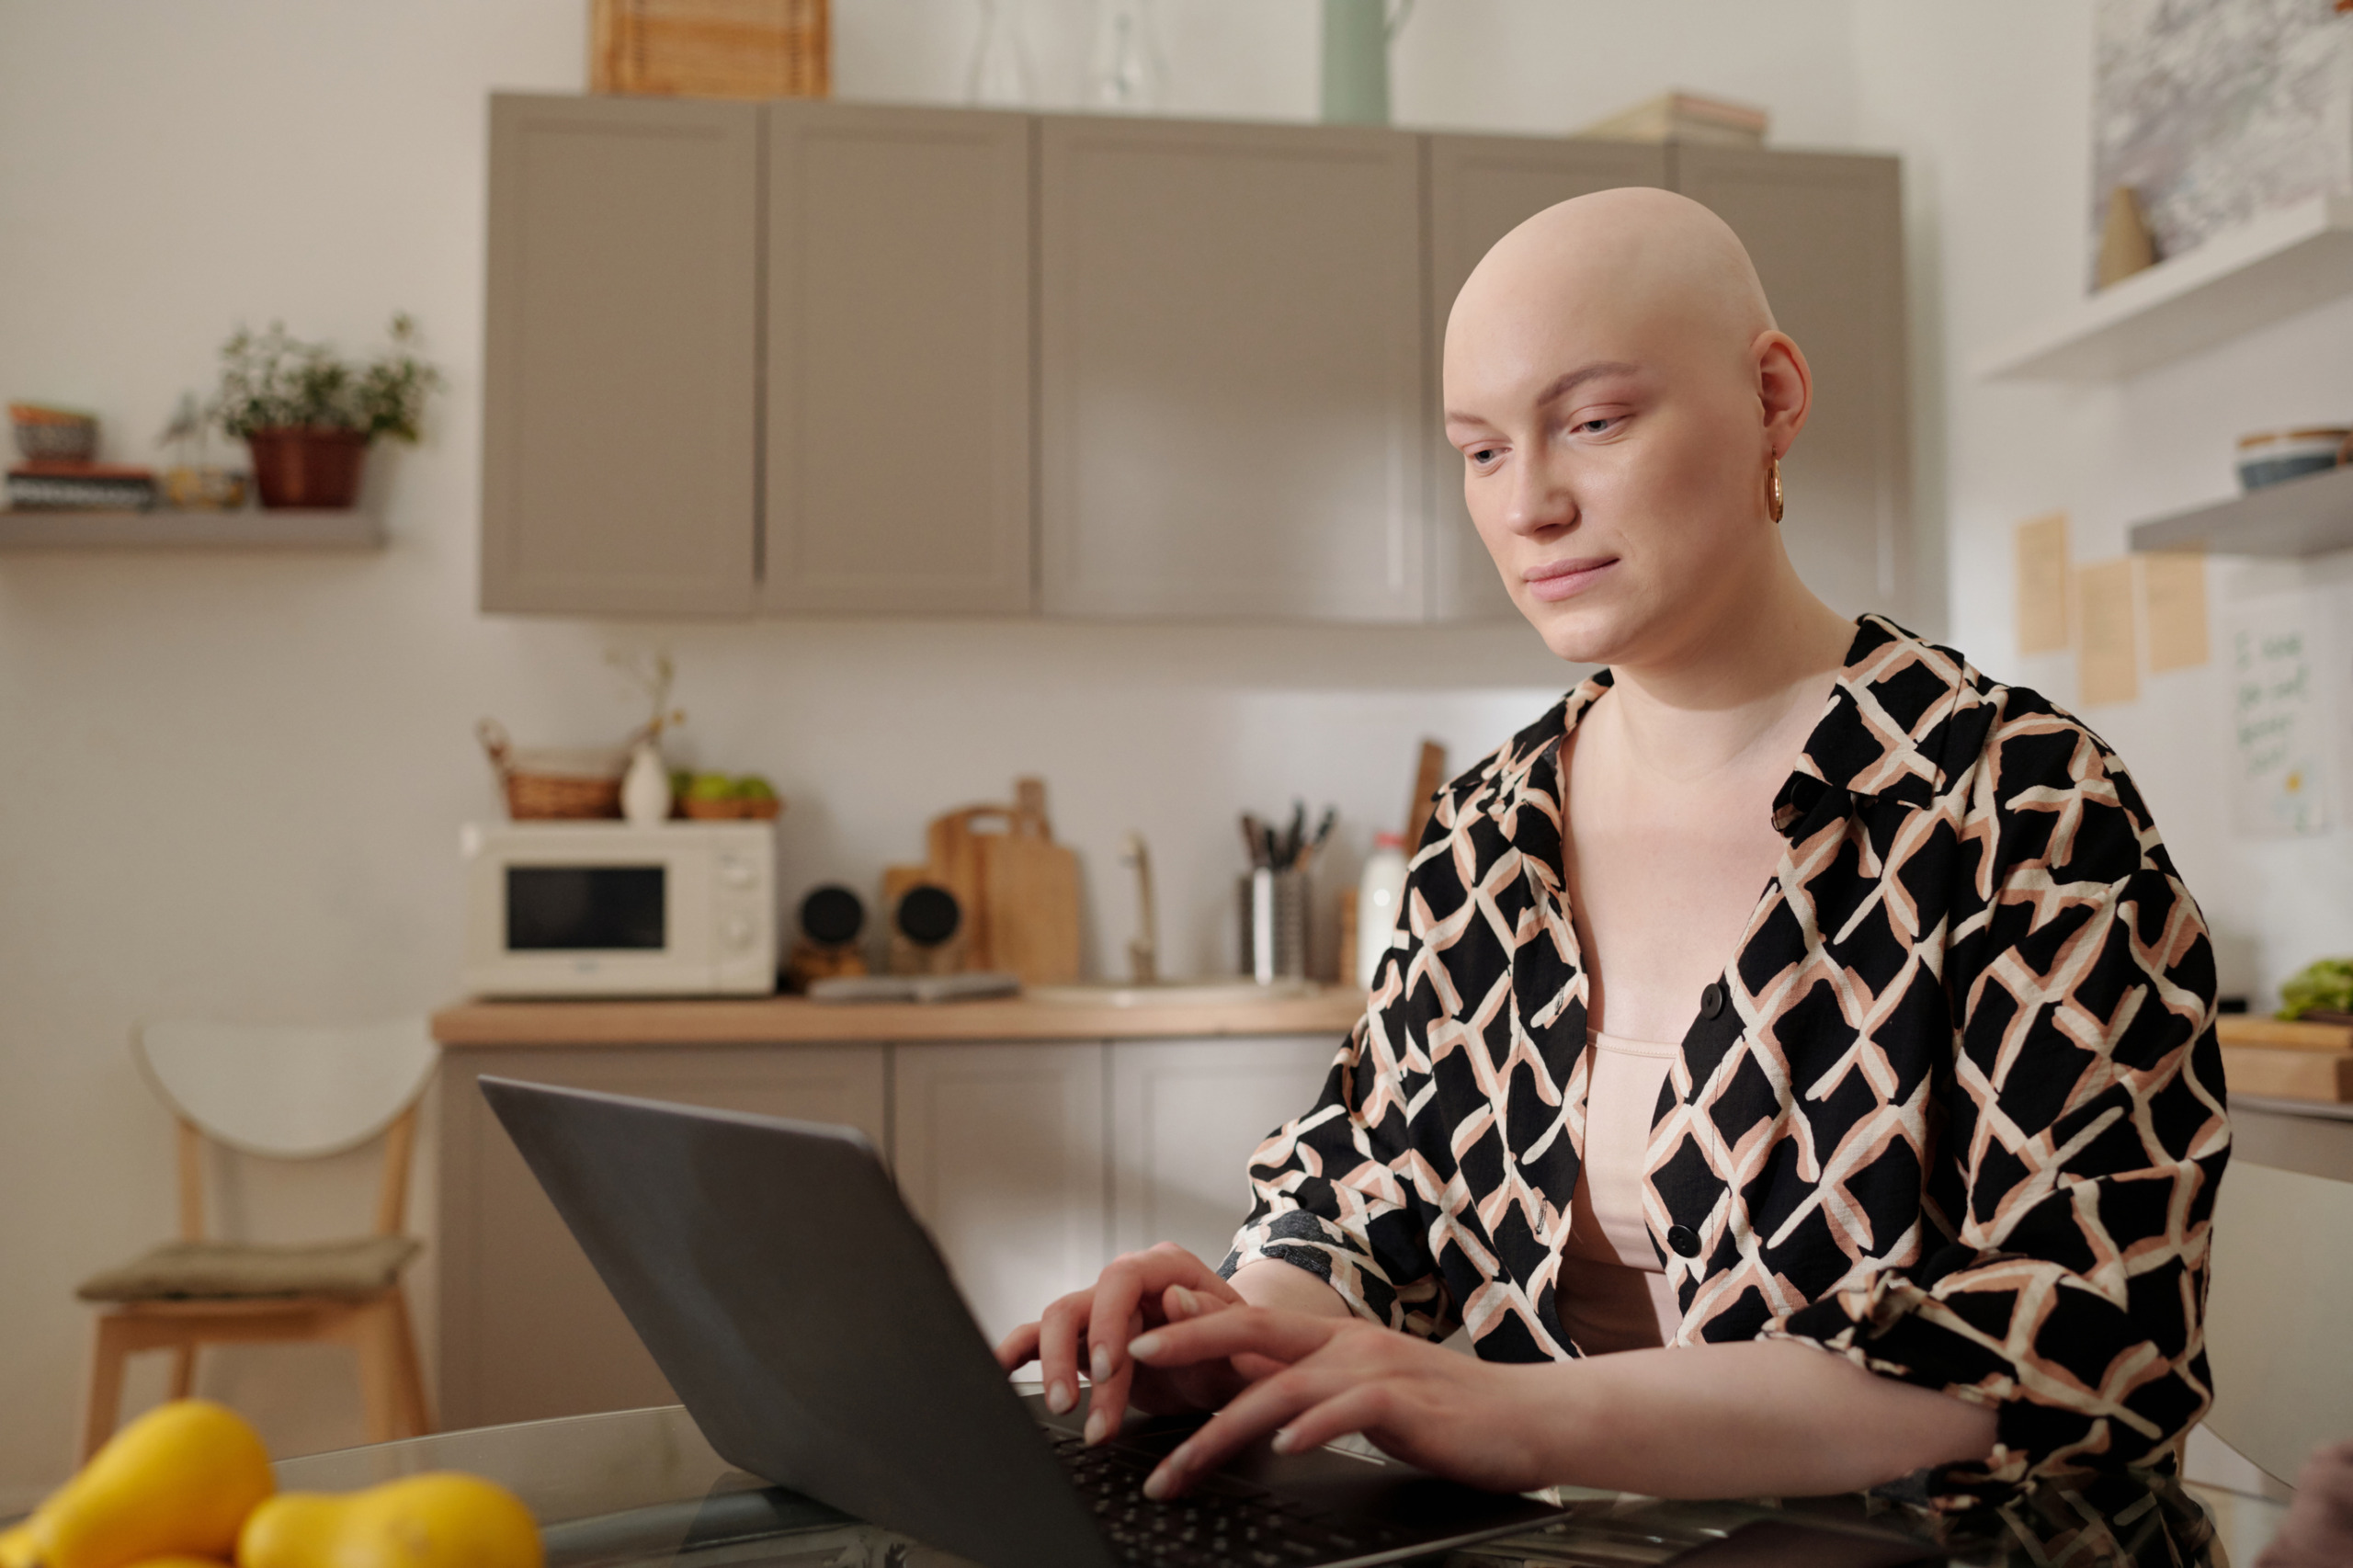 Bald woman on her laptop